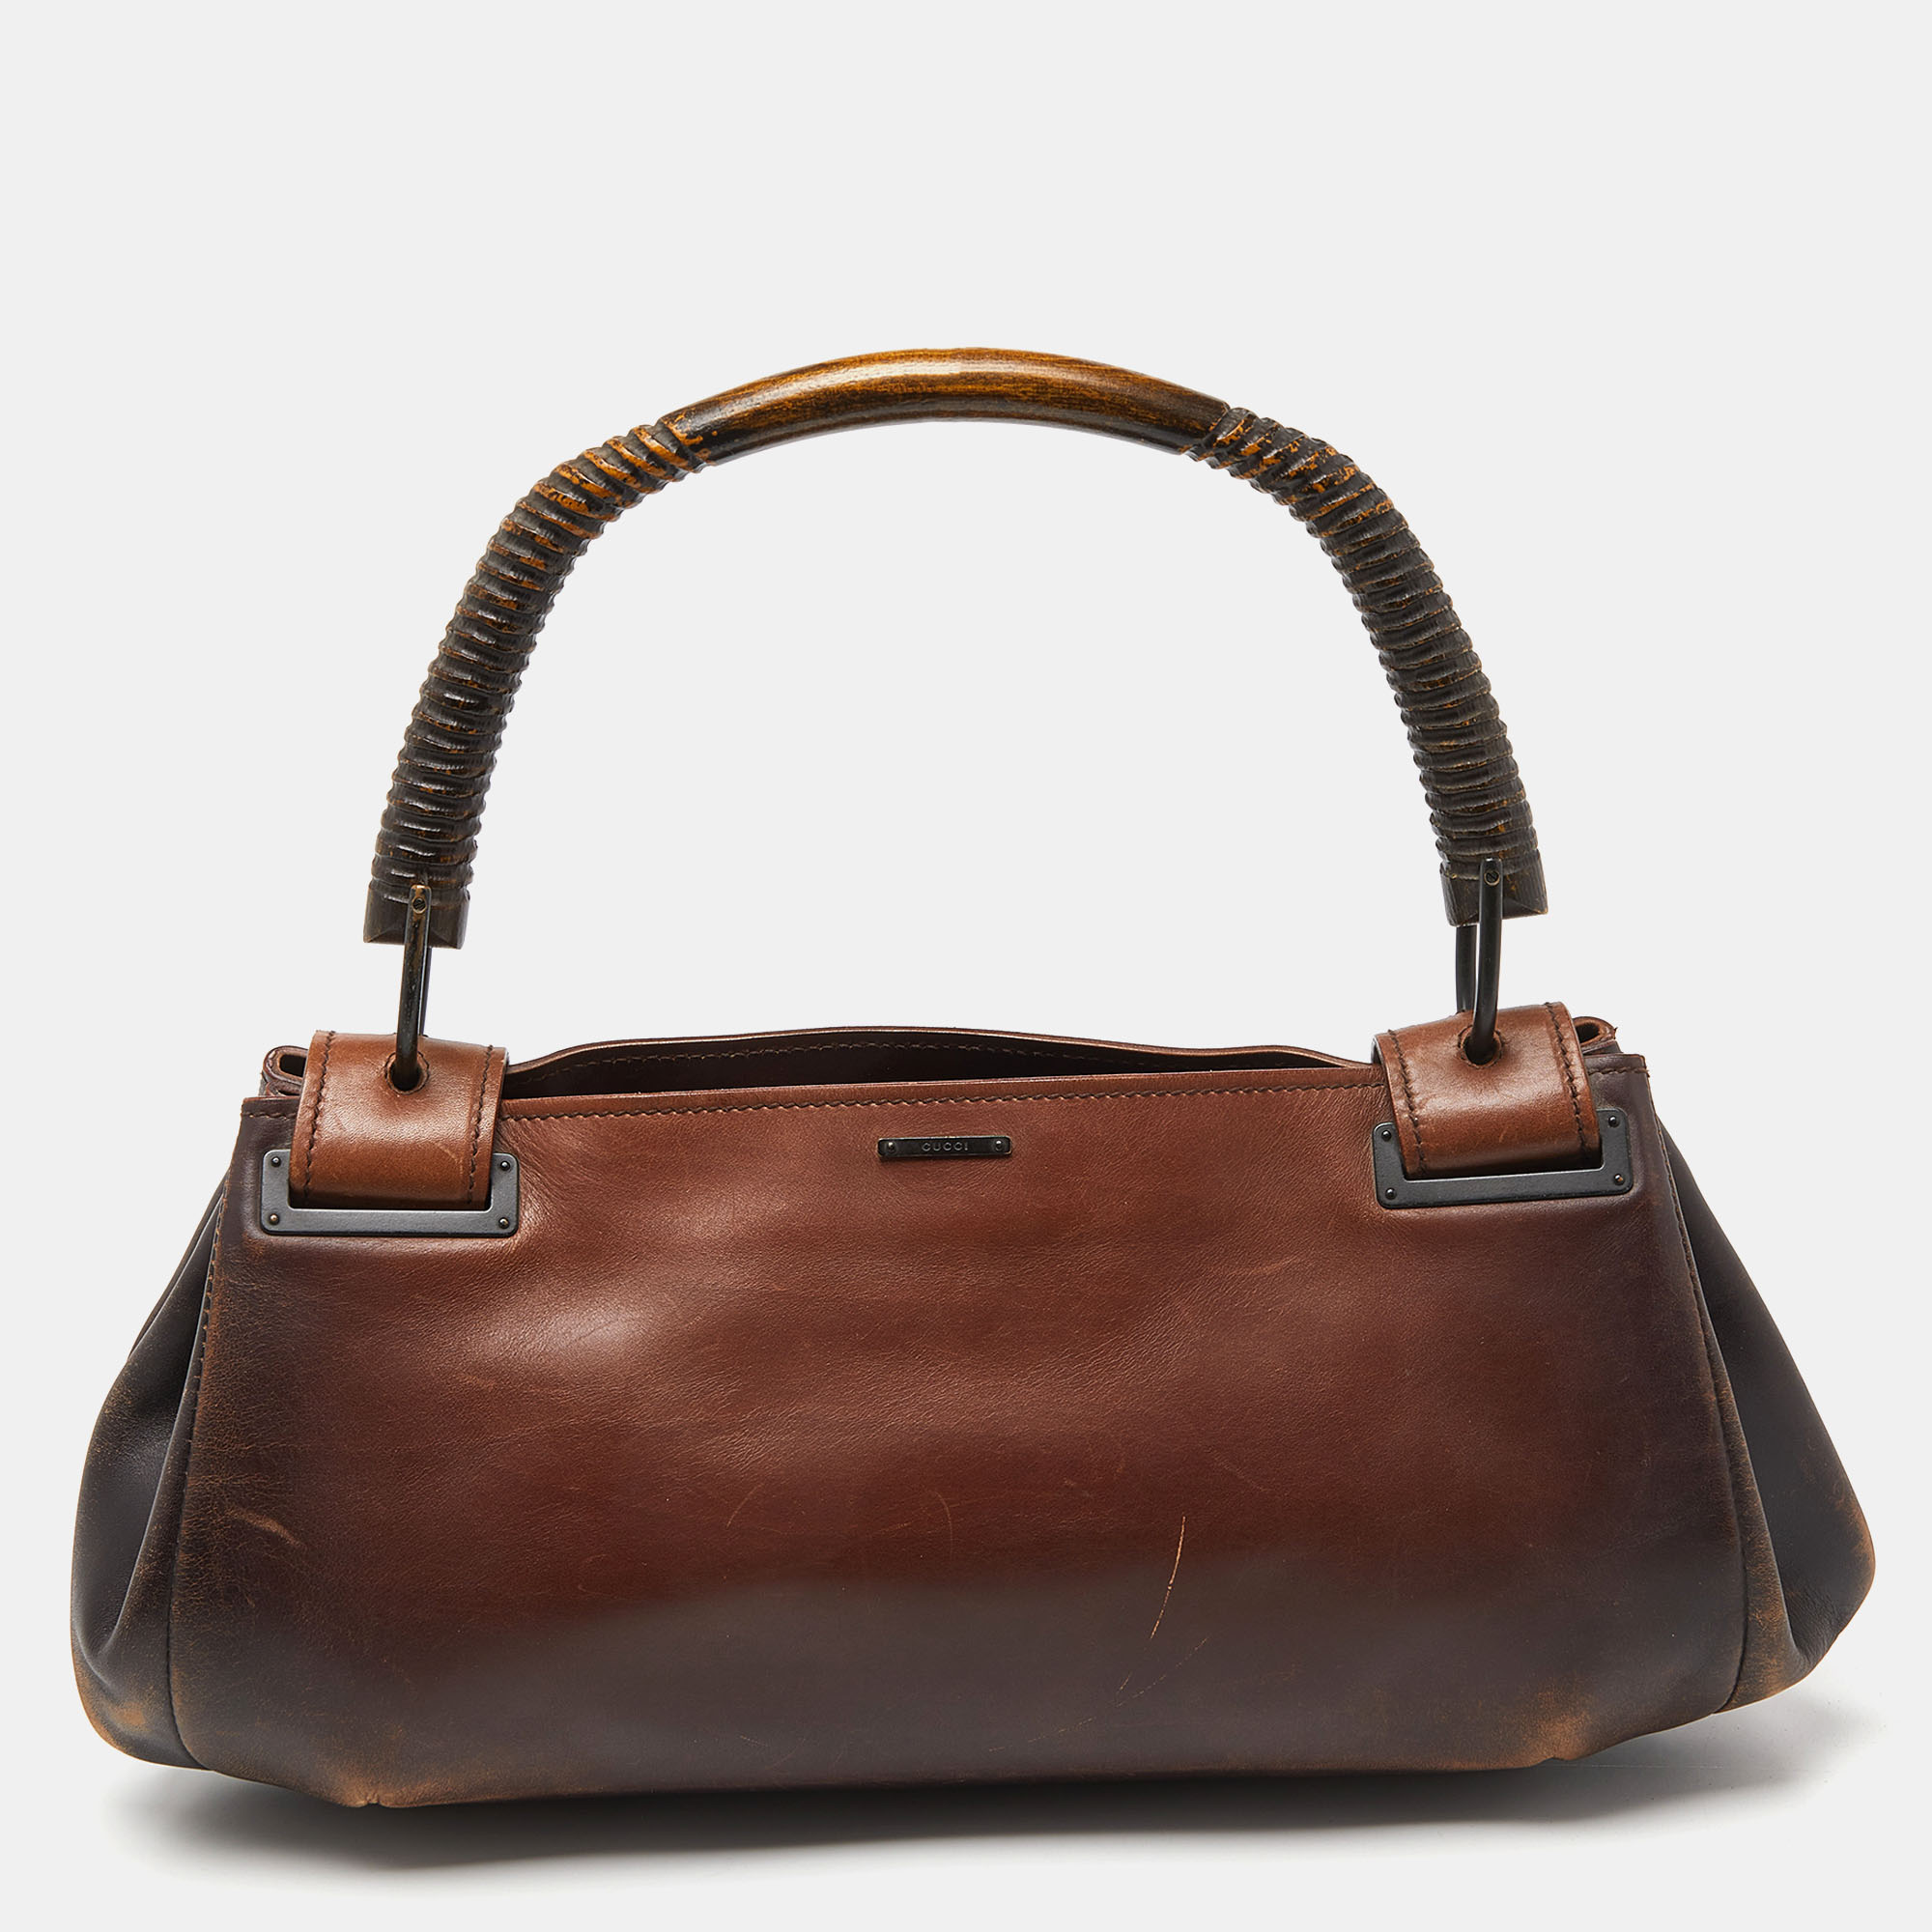 

Gucci Two Tone Brown Leather Satchel